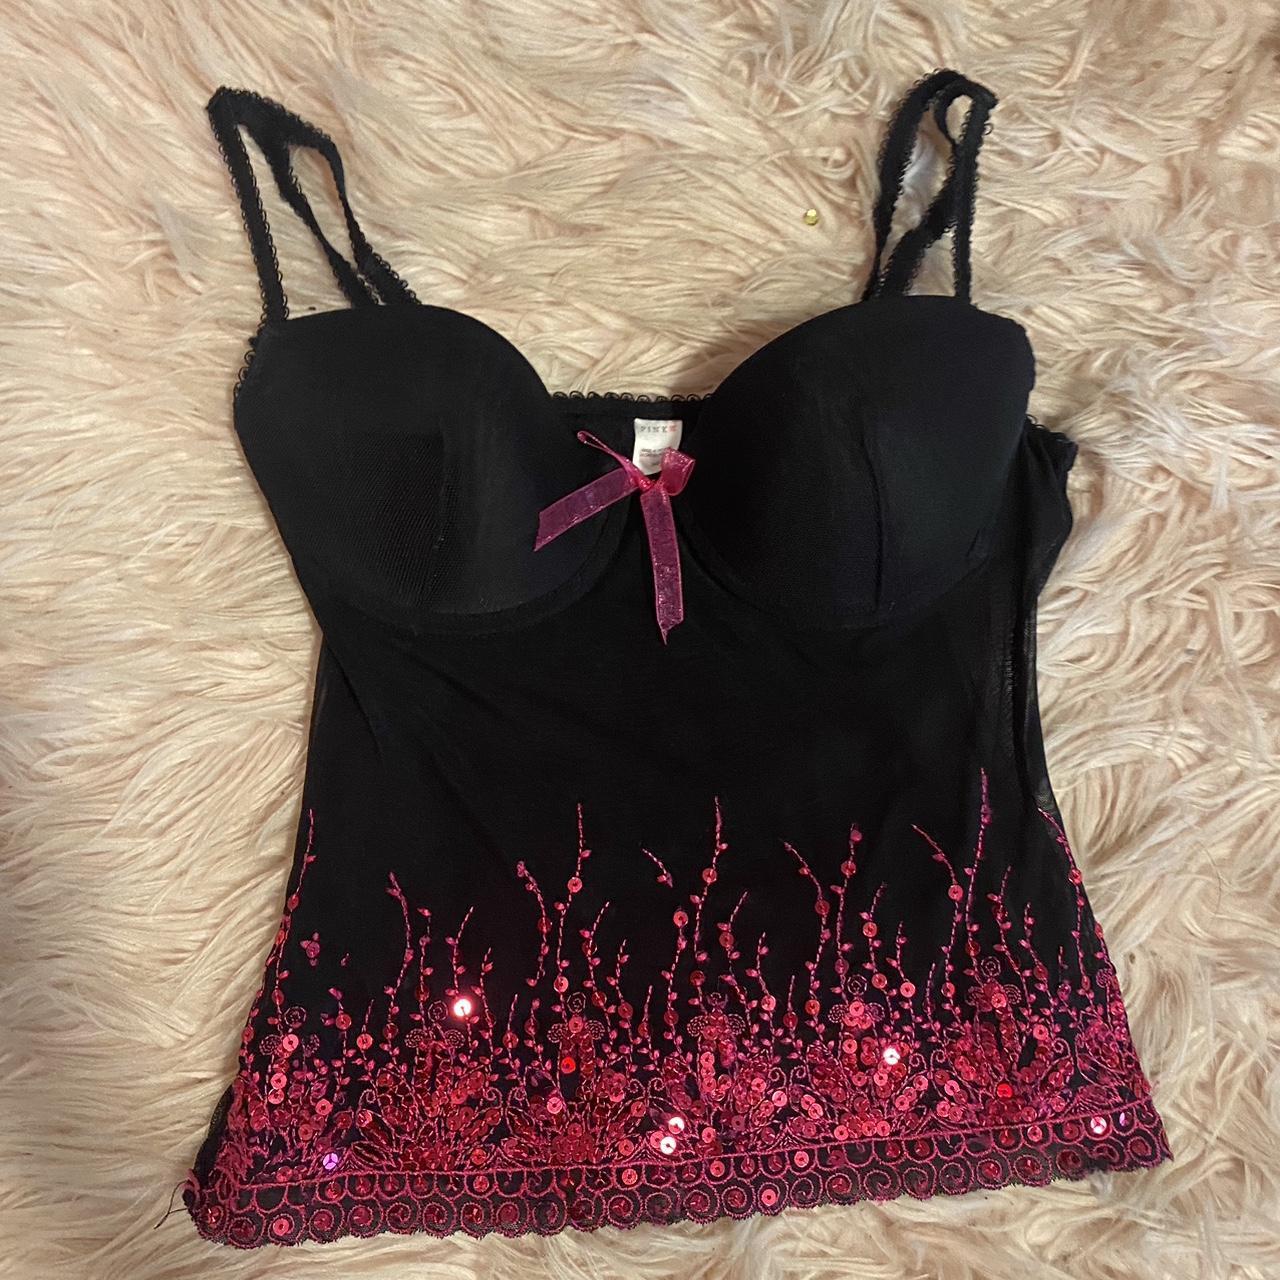 pink corset with lace brand - vaacodor size - - Depop